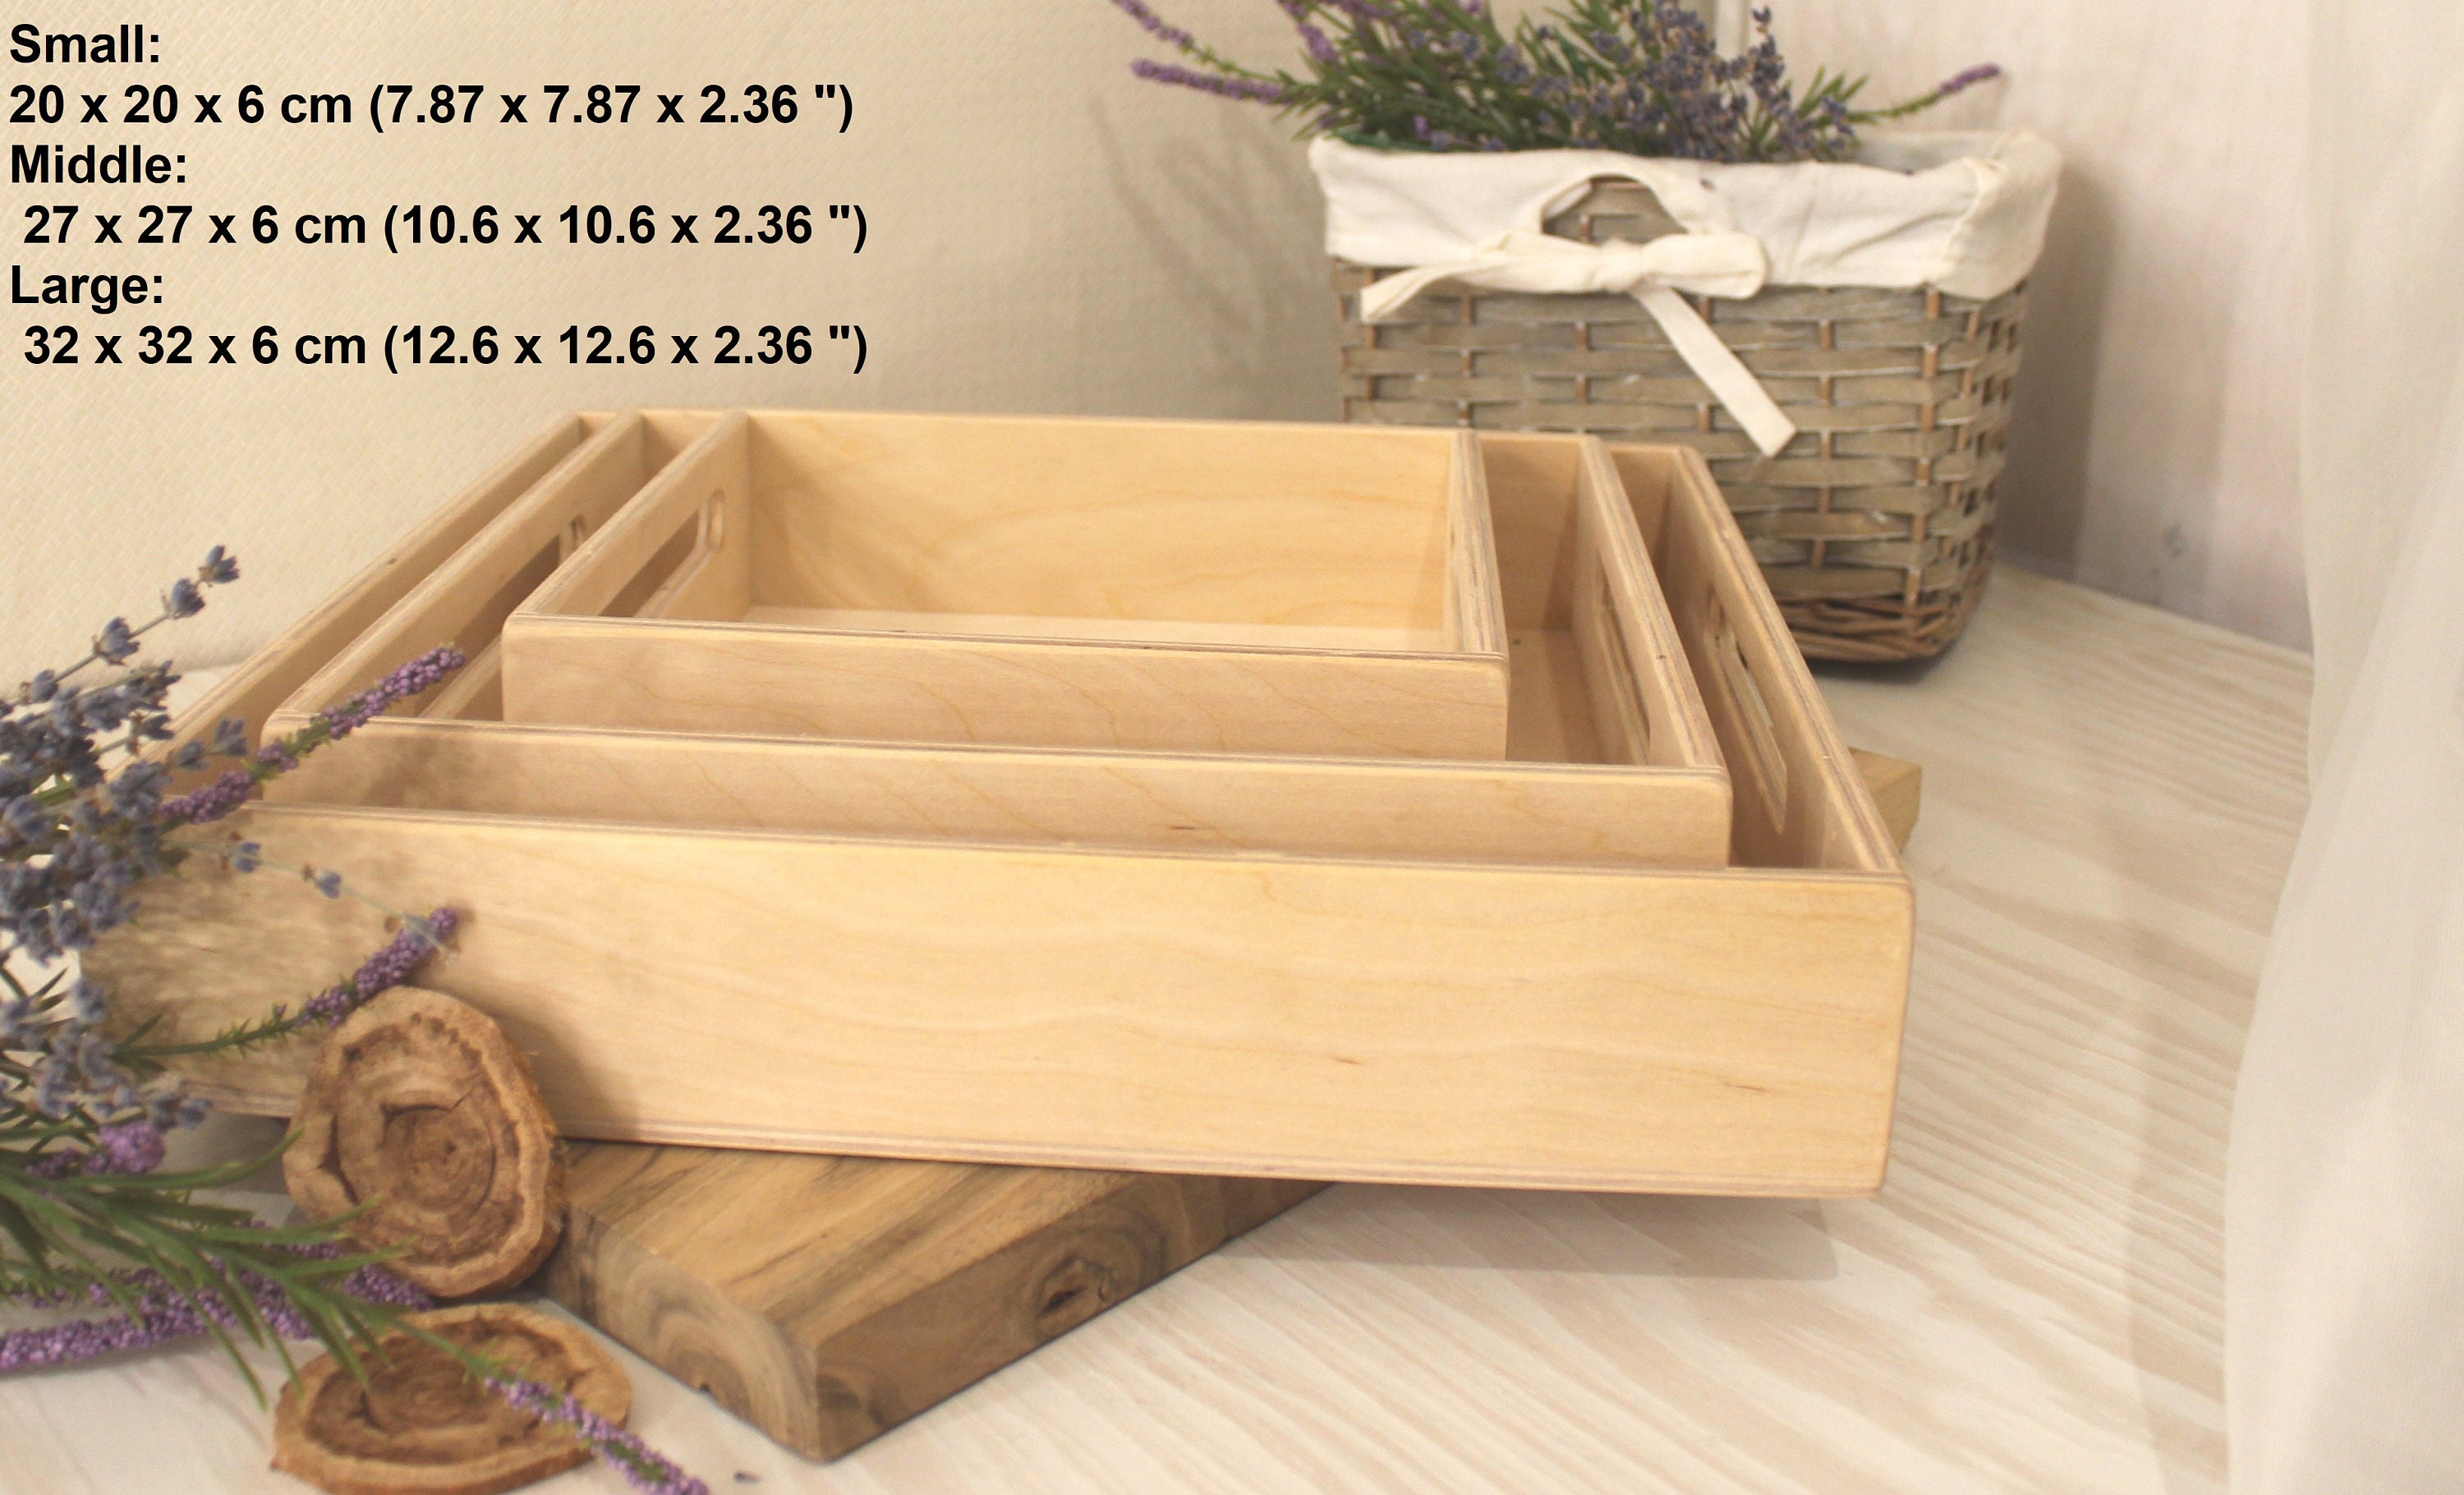 Wooden Living - Wood Tray/Wooden Trays | Square Serving Boxes with Handles  - Unfinished & Small | for Montessori Materials, Crafts to Paint, Kids